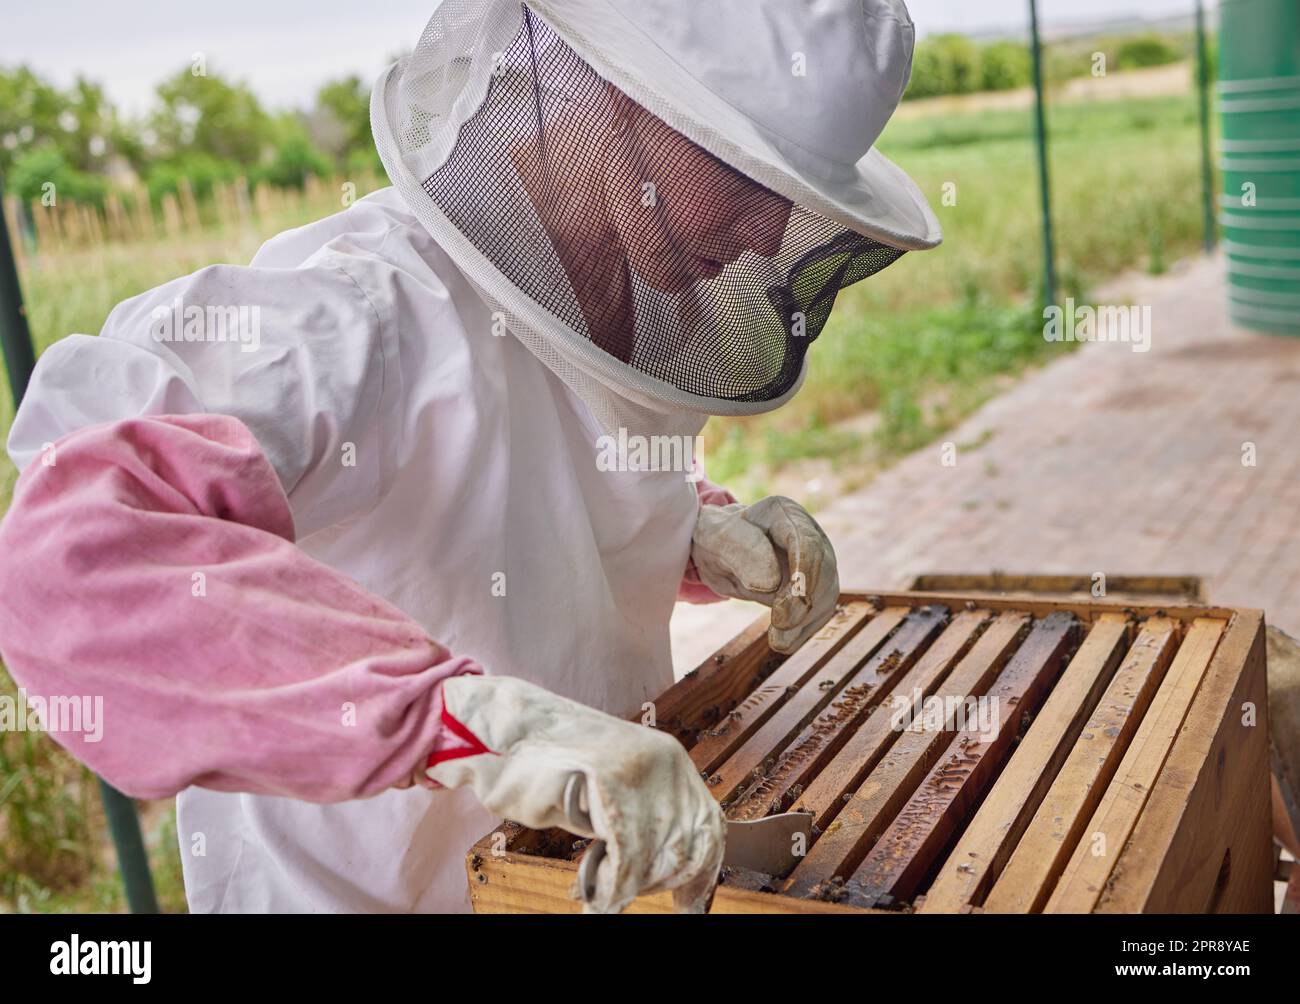 Owning a colony is a huge responsibility. a beekeeper opening a hive frame on a farm. Stock Photo